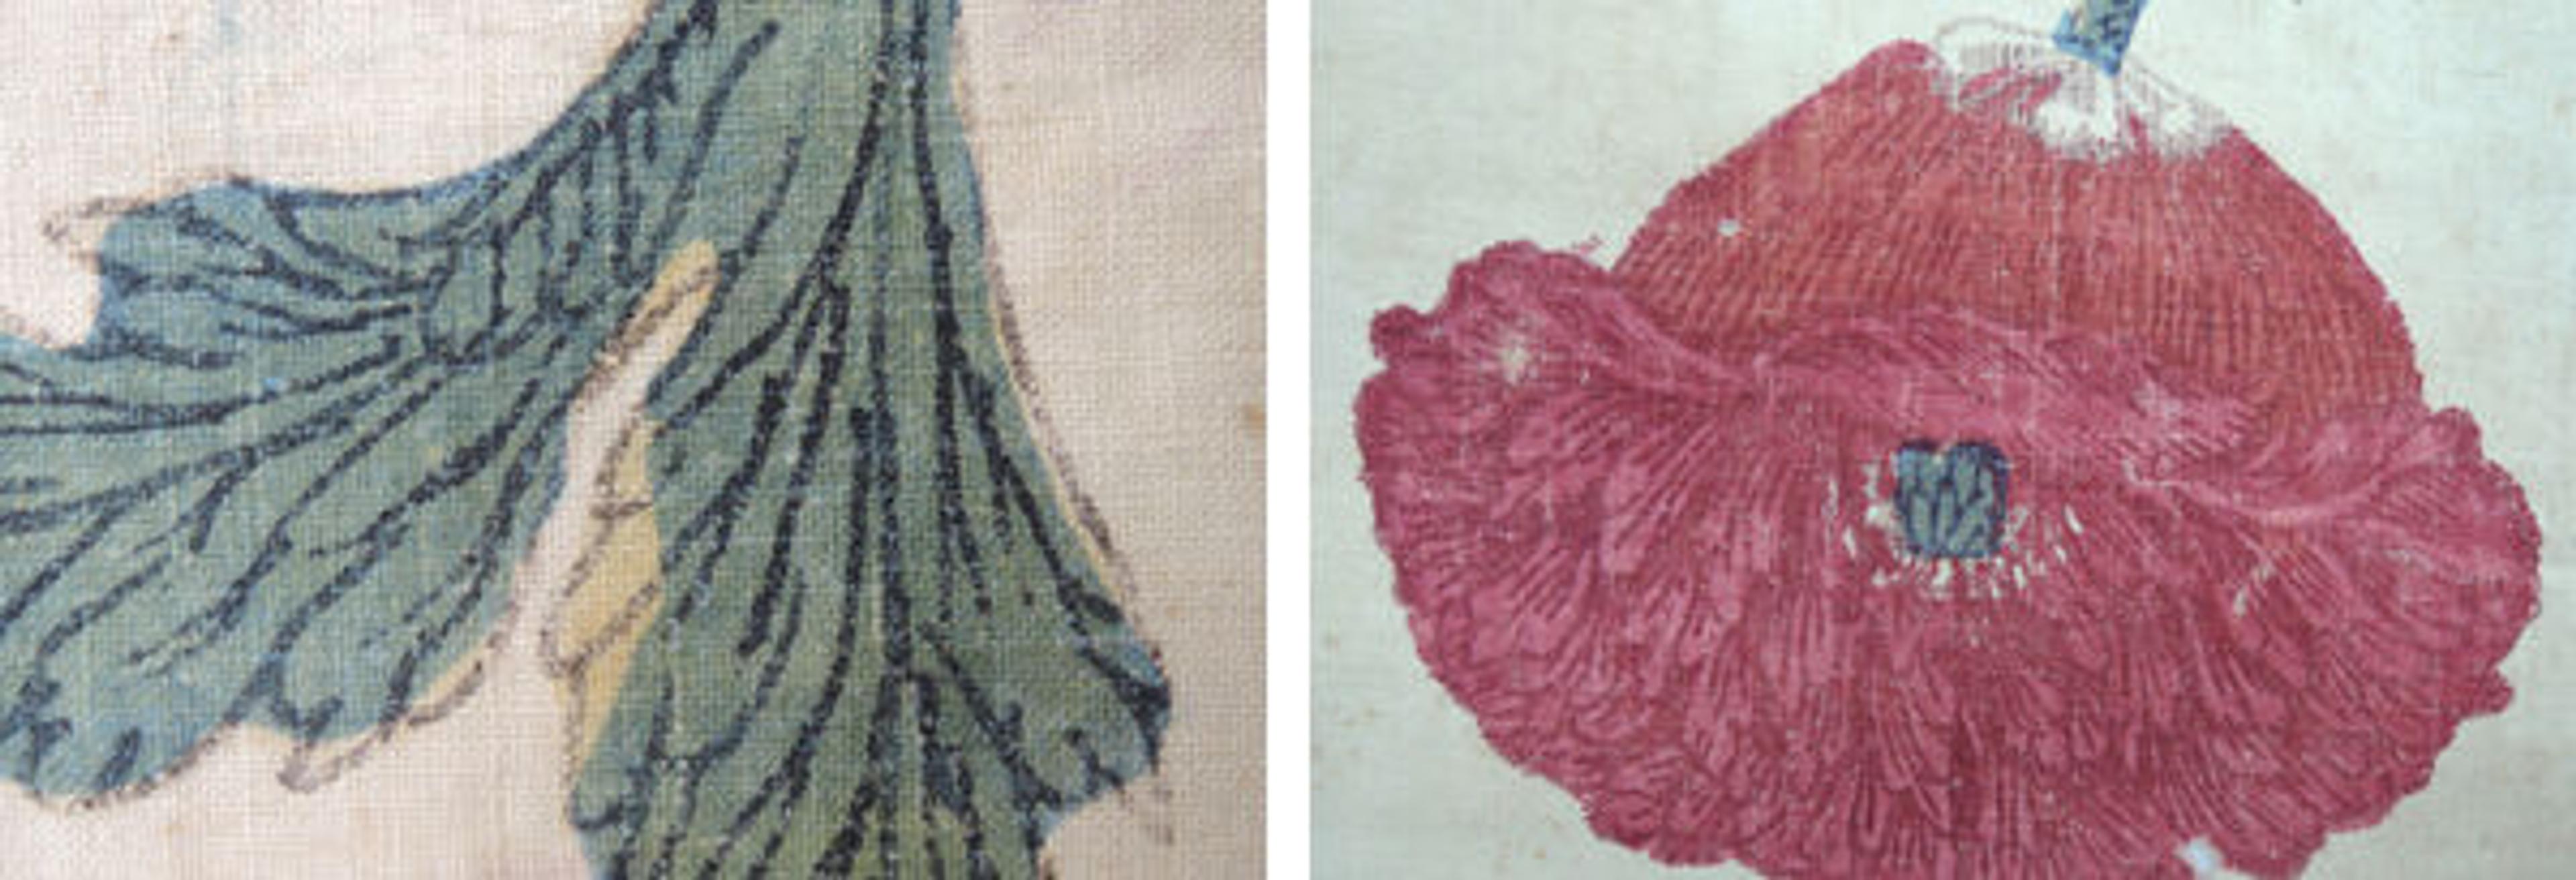 Fig. 1. Detail of flowering poppy plant (left) and leaf (right) highlighting the mordant and dye painting by hand (1982.239b). Photo by Yael Rosenfield